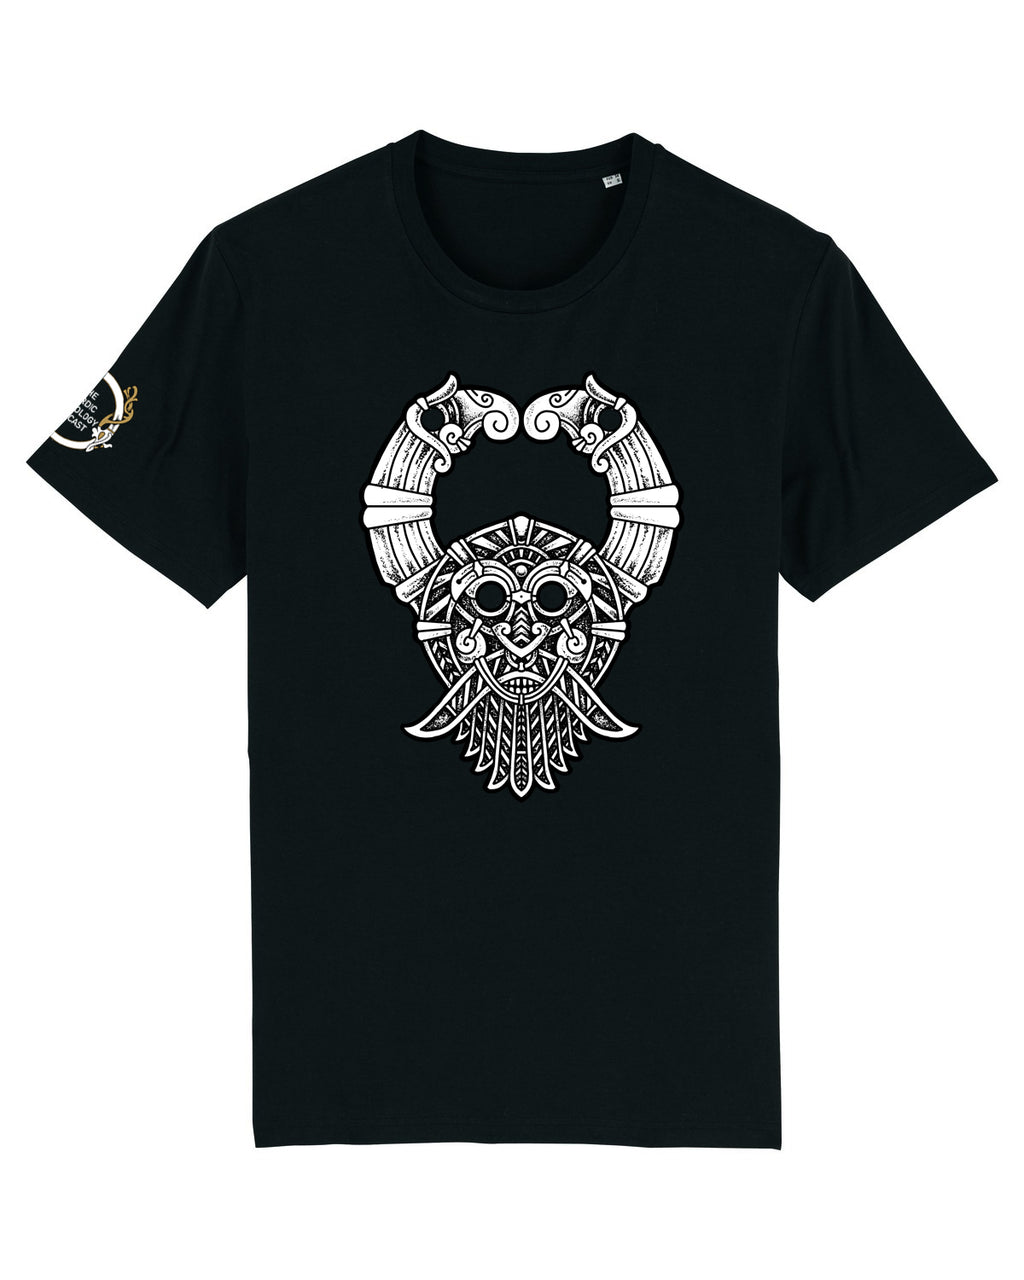 Raven Odin Tee (Limited Edition)